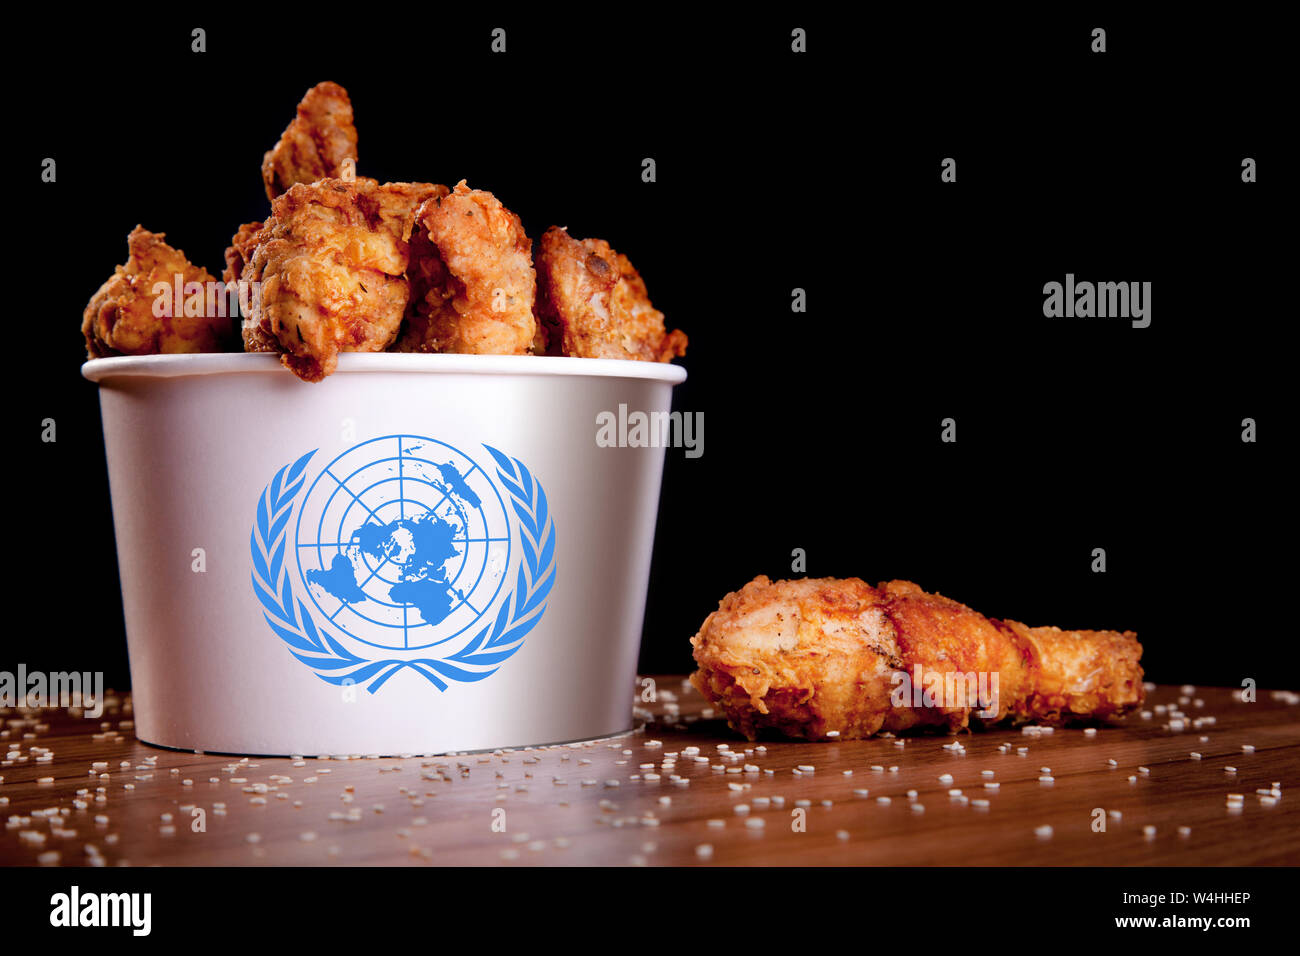 BBQ Chicken wings in bucket flag of UN on a wooden table and black background. Stock Photo